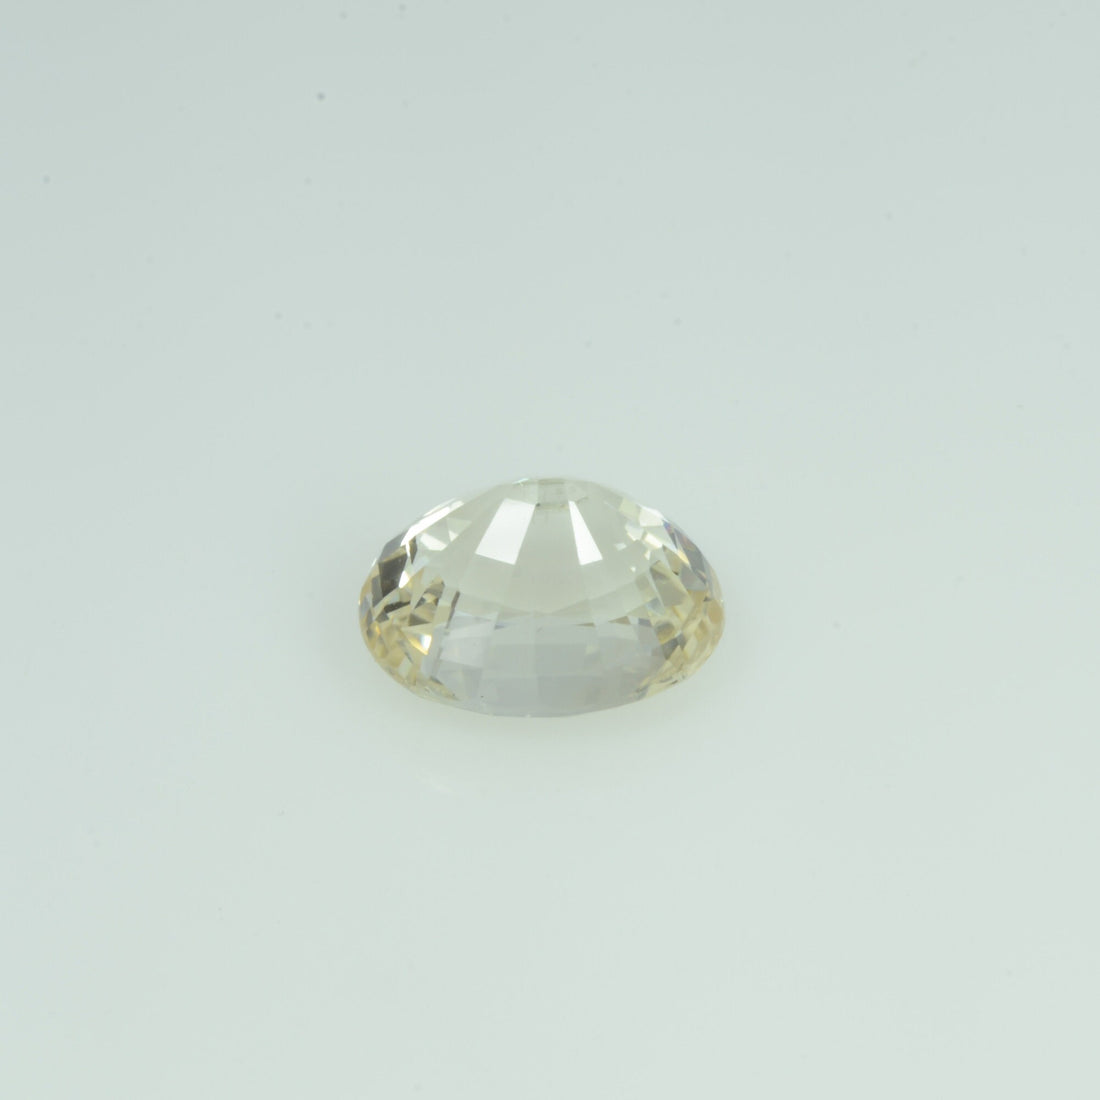 3.08 cts Unheated Natural Yellow Sapphire Loose Gemstone Oval Cut